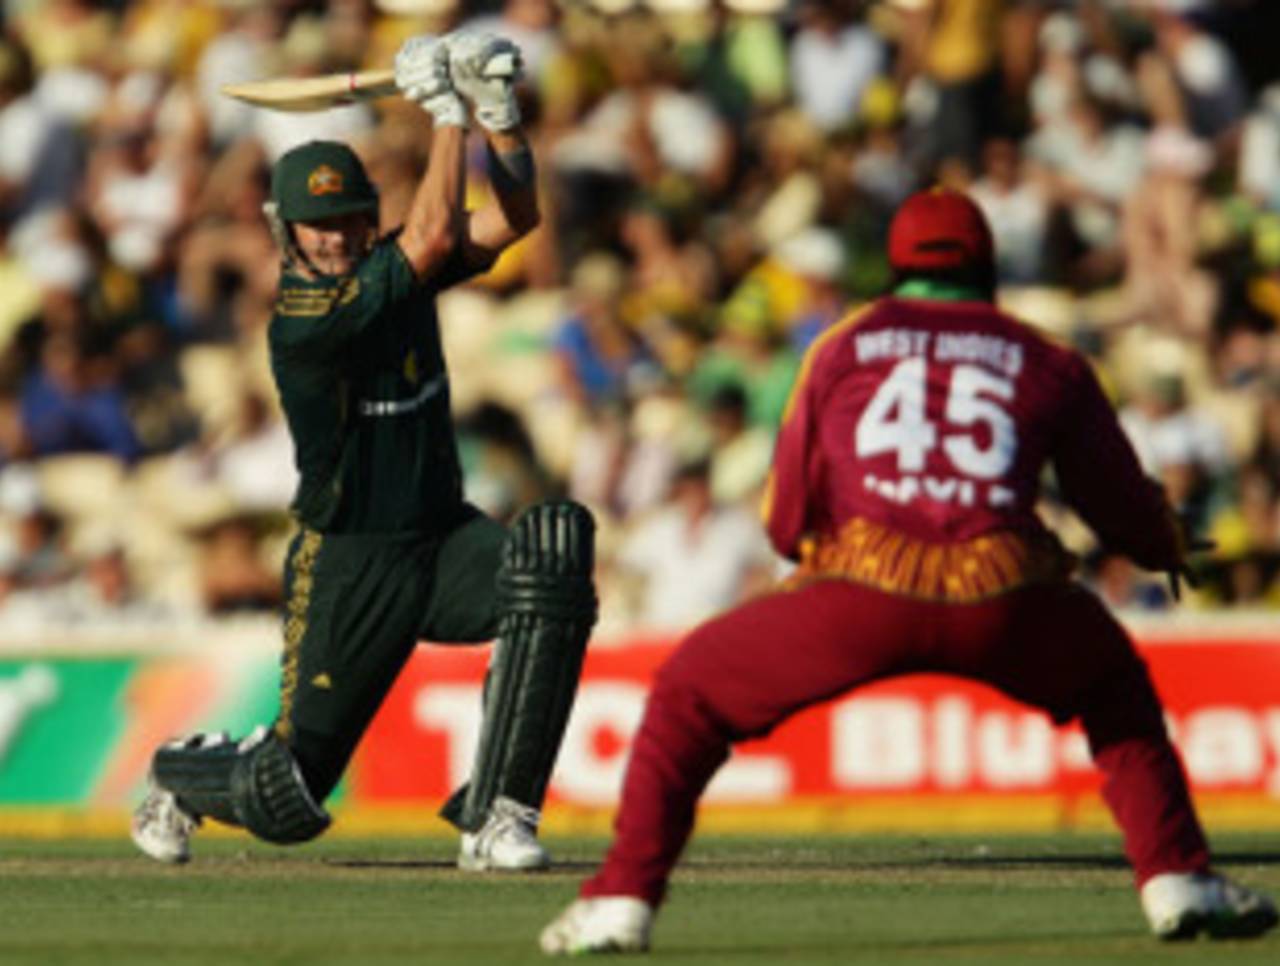 Shane Watson muscles a drive during his half-century, Australia v West Indies, 2nd ODI, Adelaide, 9 February, 2010